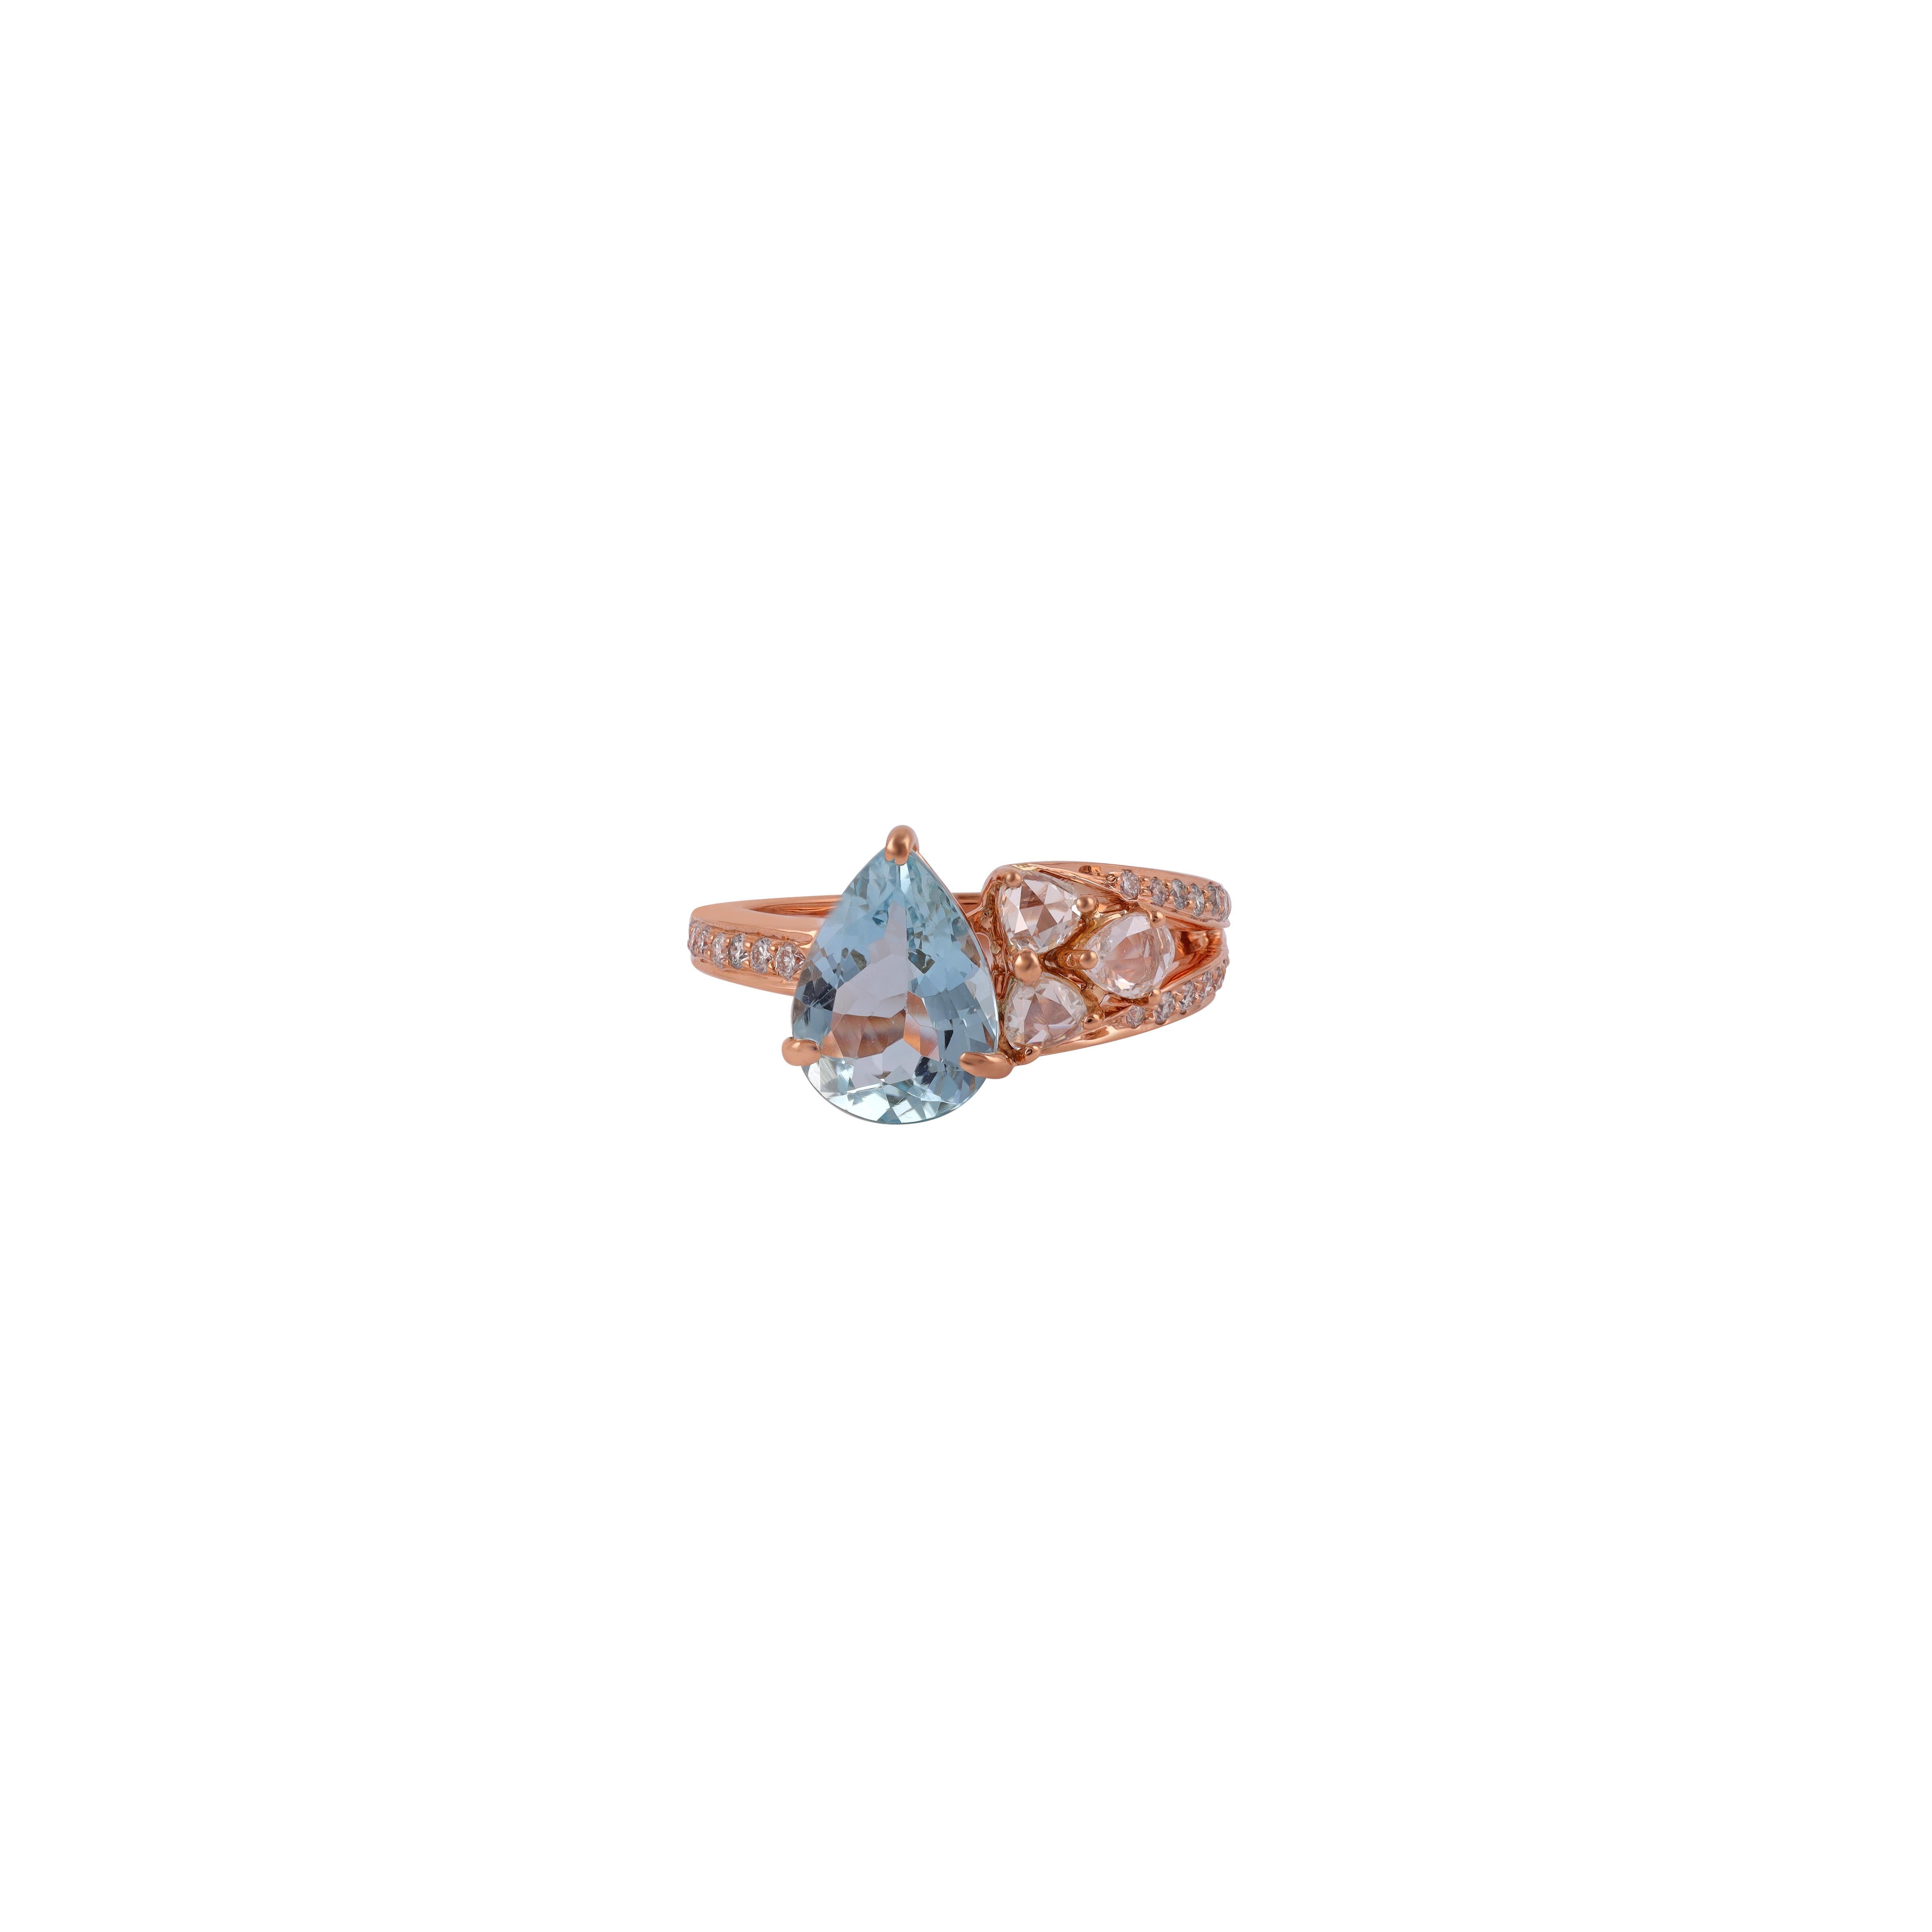 Elegant Oval Cut Aquamarine Ring  with  Sparkly Round cut & Rose Cut Diamonds in 18kt Rose Gold mounting.

Aquamarine (2.04 Carat) - Embodies the splendor of the sea, Unparalleled clarity and a soft, delicate tone which radiates life, vibrancy and